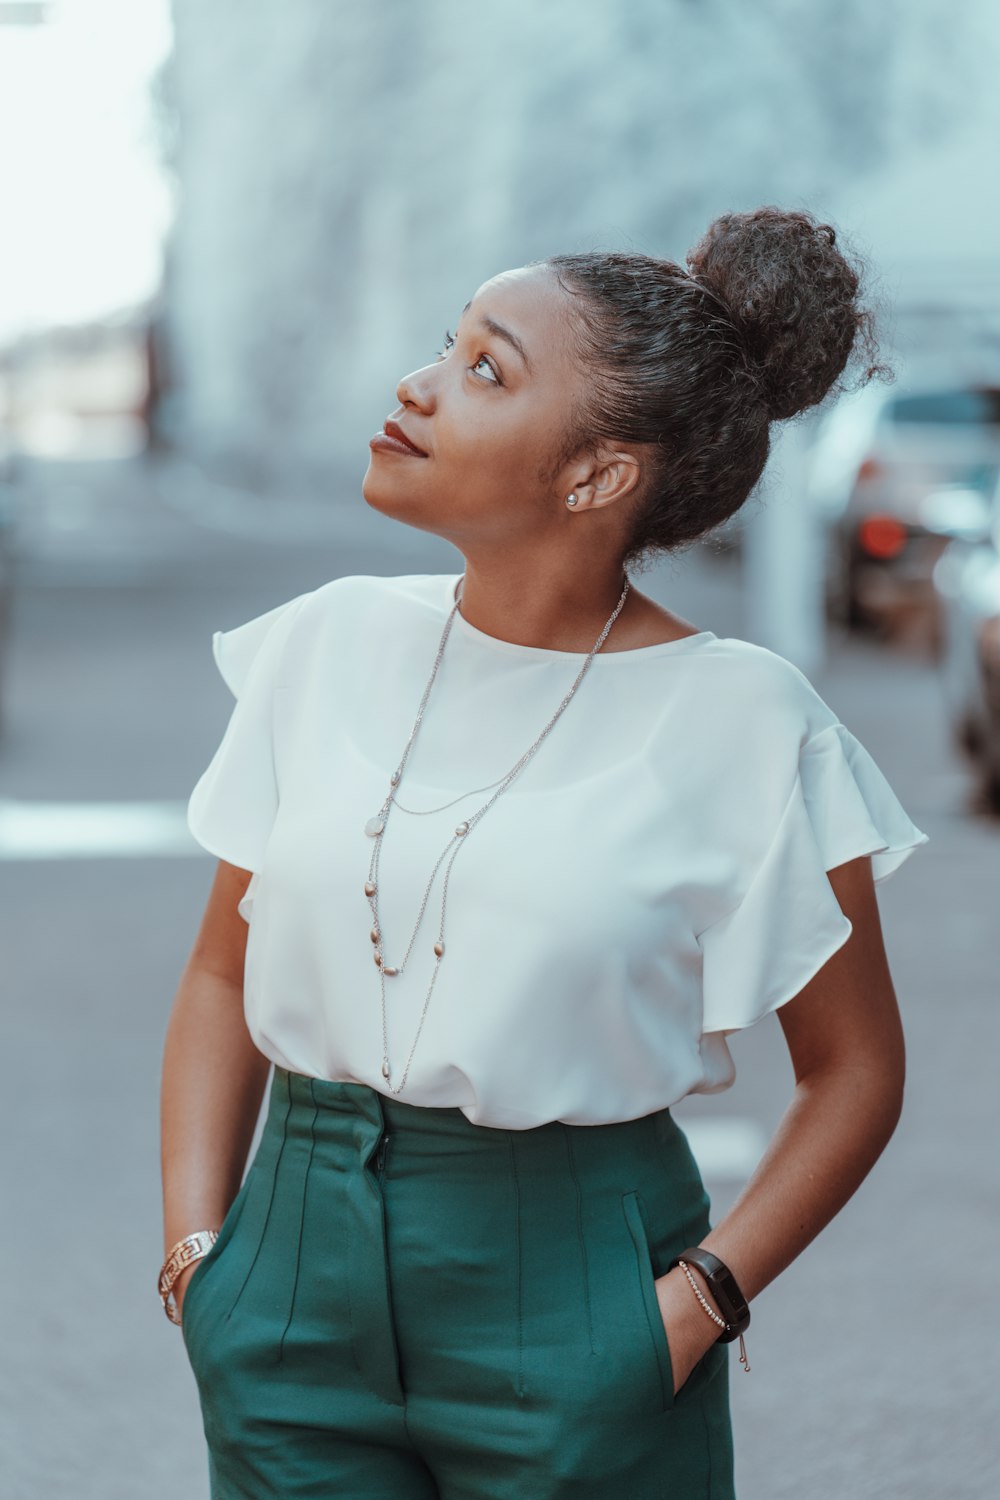 Woman in white crew neck t-shirt and green denim shorts photo – Free The  bahamas Image on Unsplash